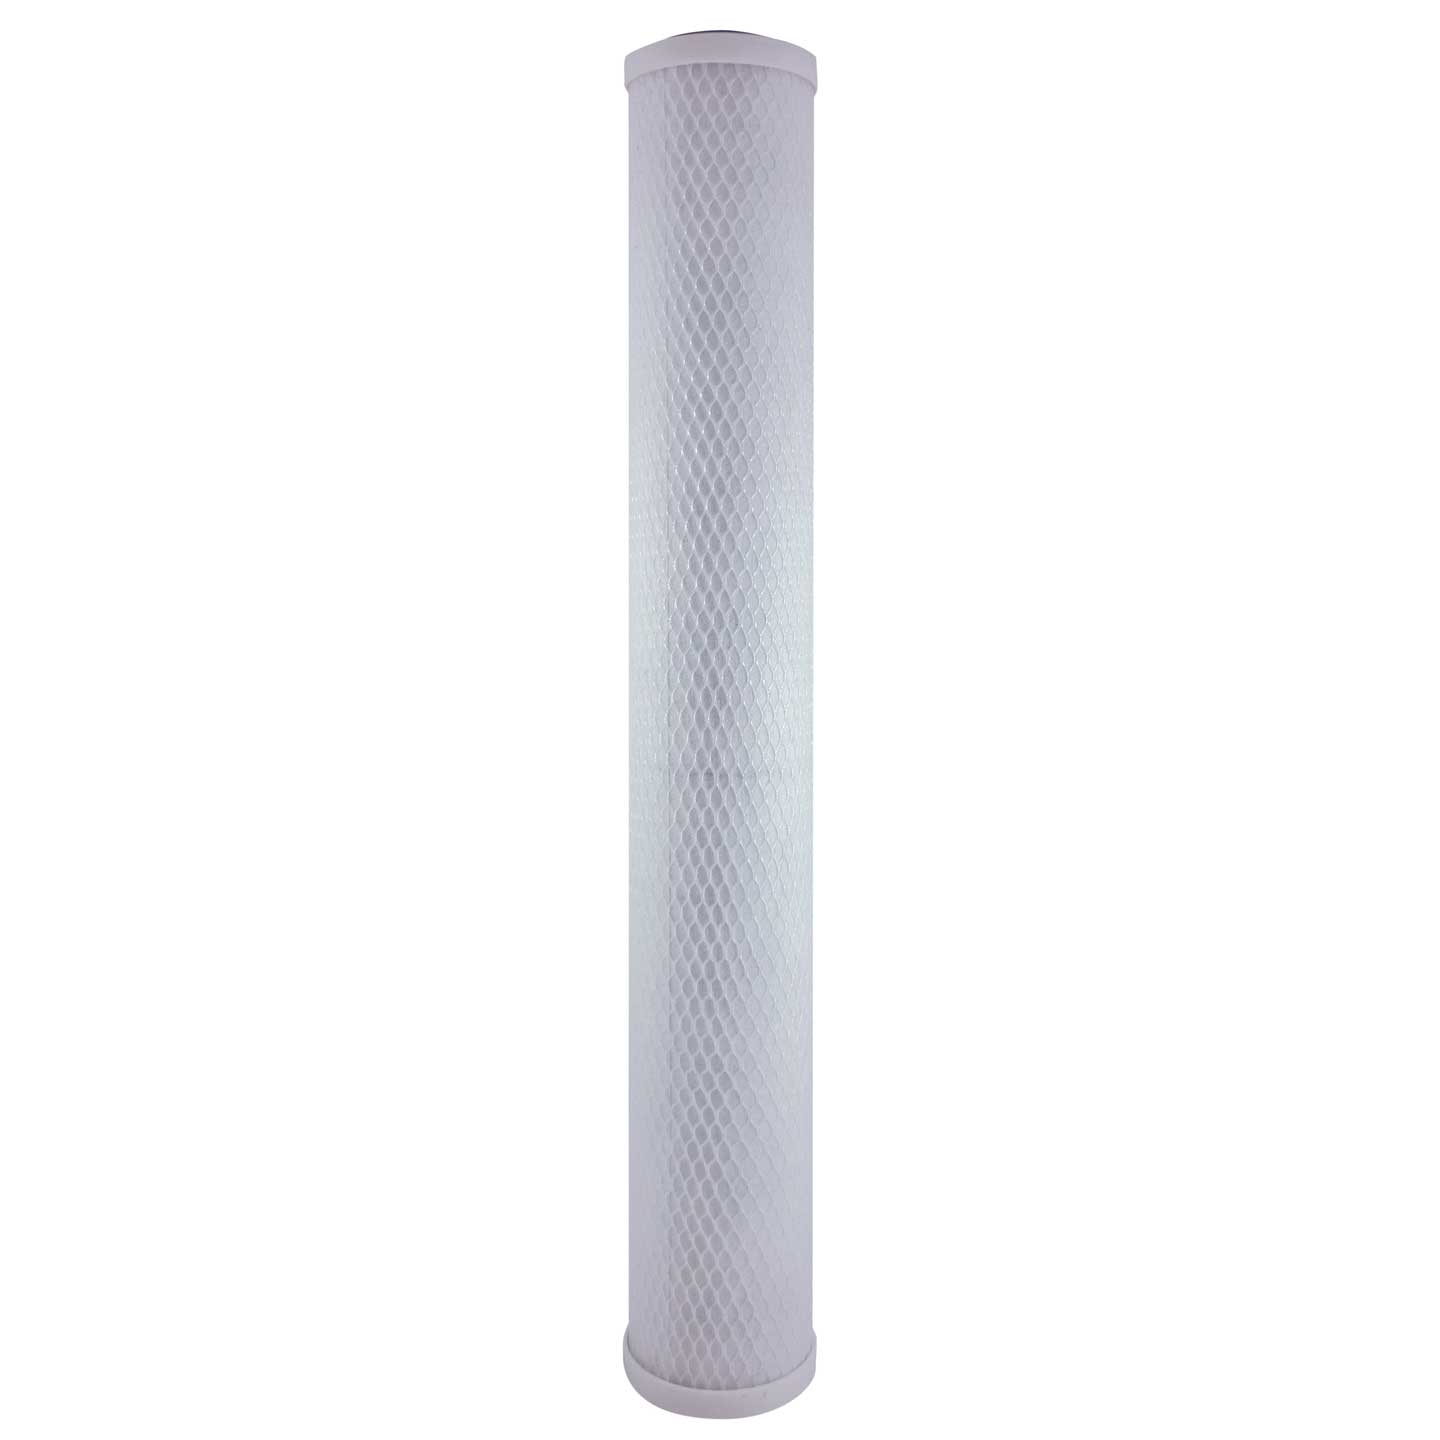 EPM-20 Pentek Comparable Whole House Water Filter by Tier1 (front)